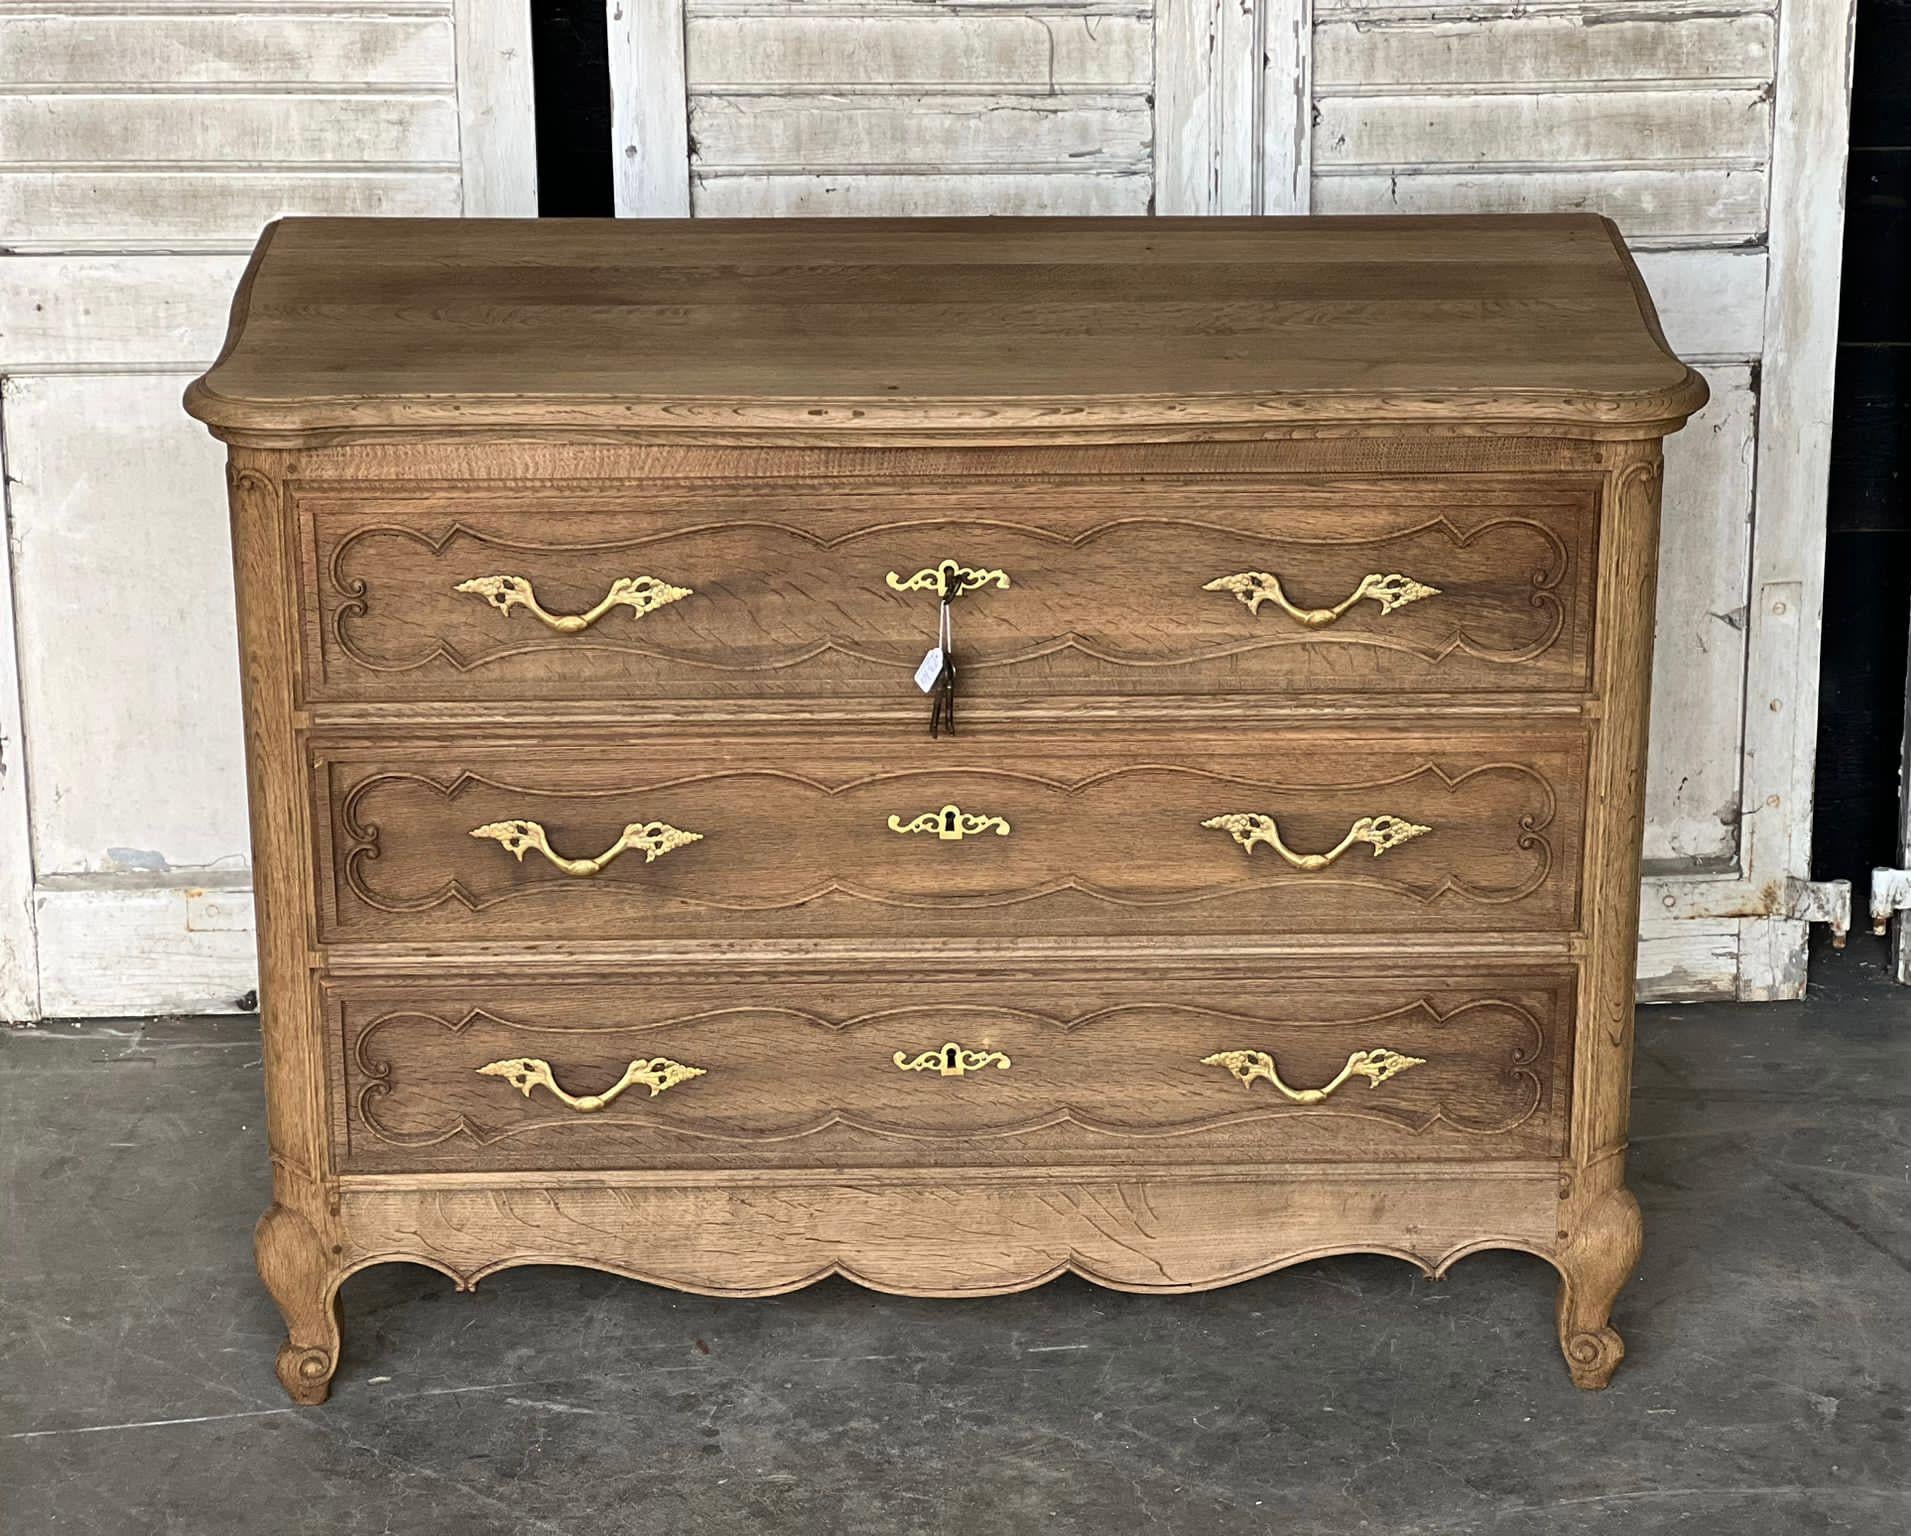 A delightful French commode chest of drawers, made from solid Oak and dating to the early 1900s. Of excellent quality construction as can be seen by the drawer dovetails. Keys present and in overall excellent condition for the home.
Measures: Width